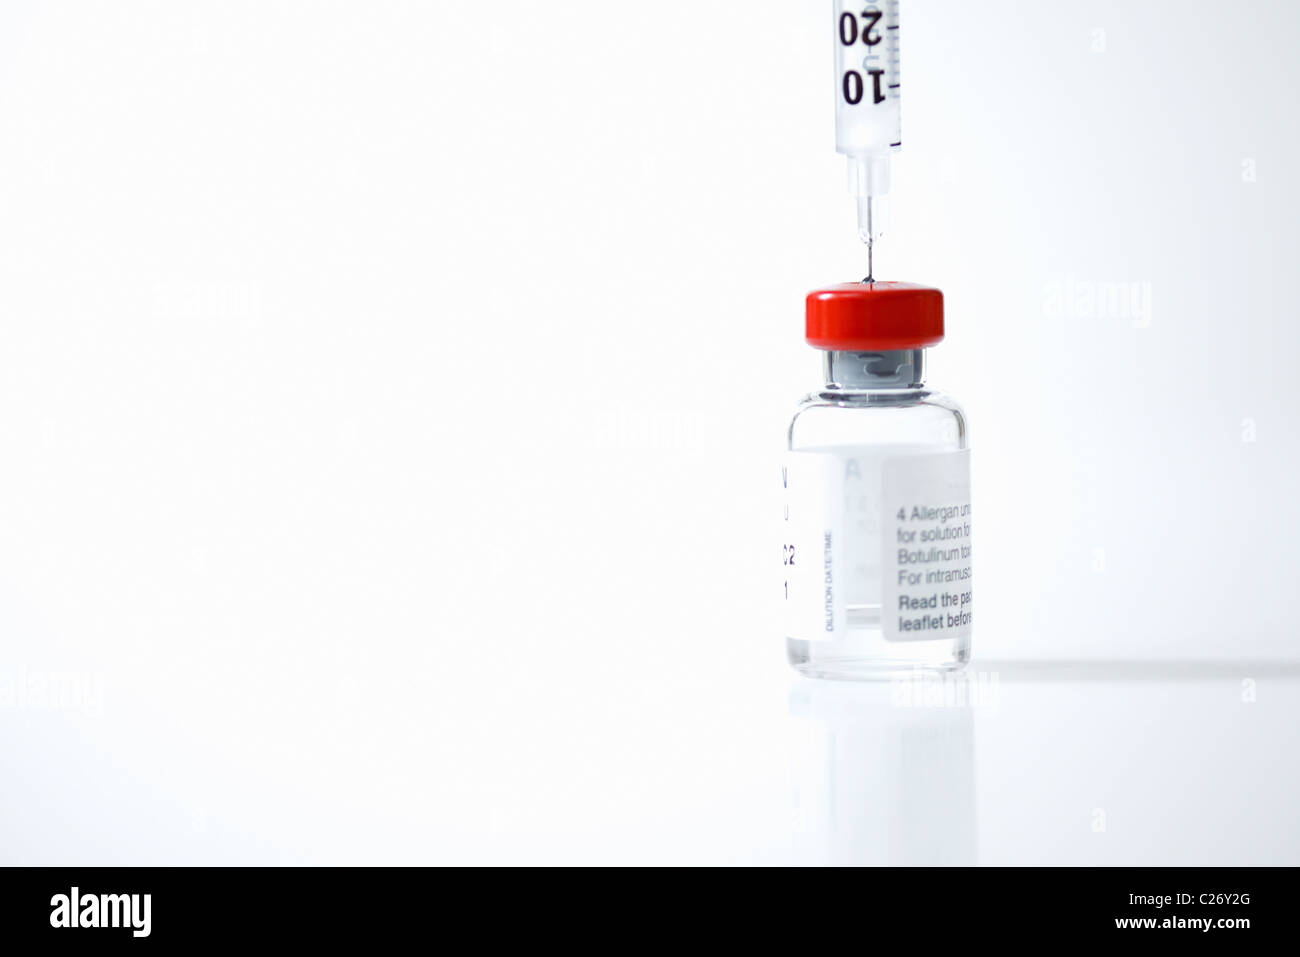 Hypodermic Needle Inserted in Medicine Vial Stock Photo